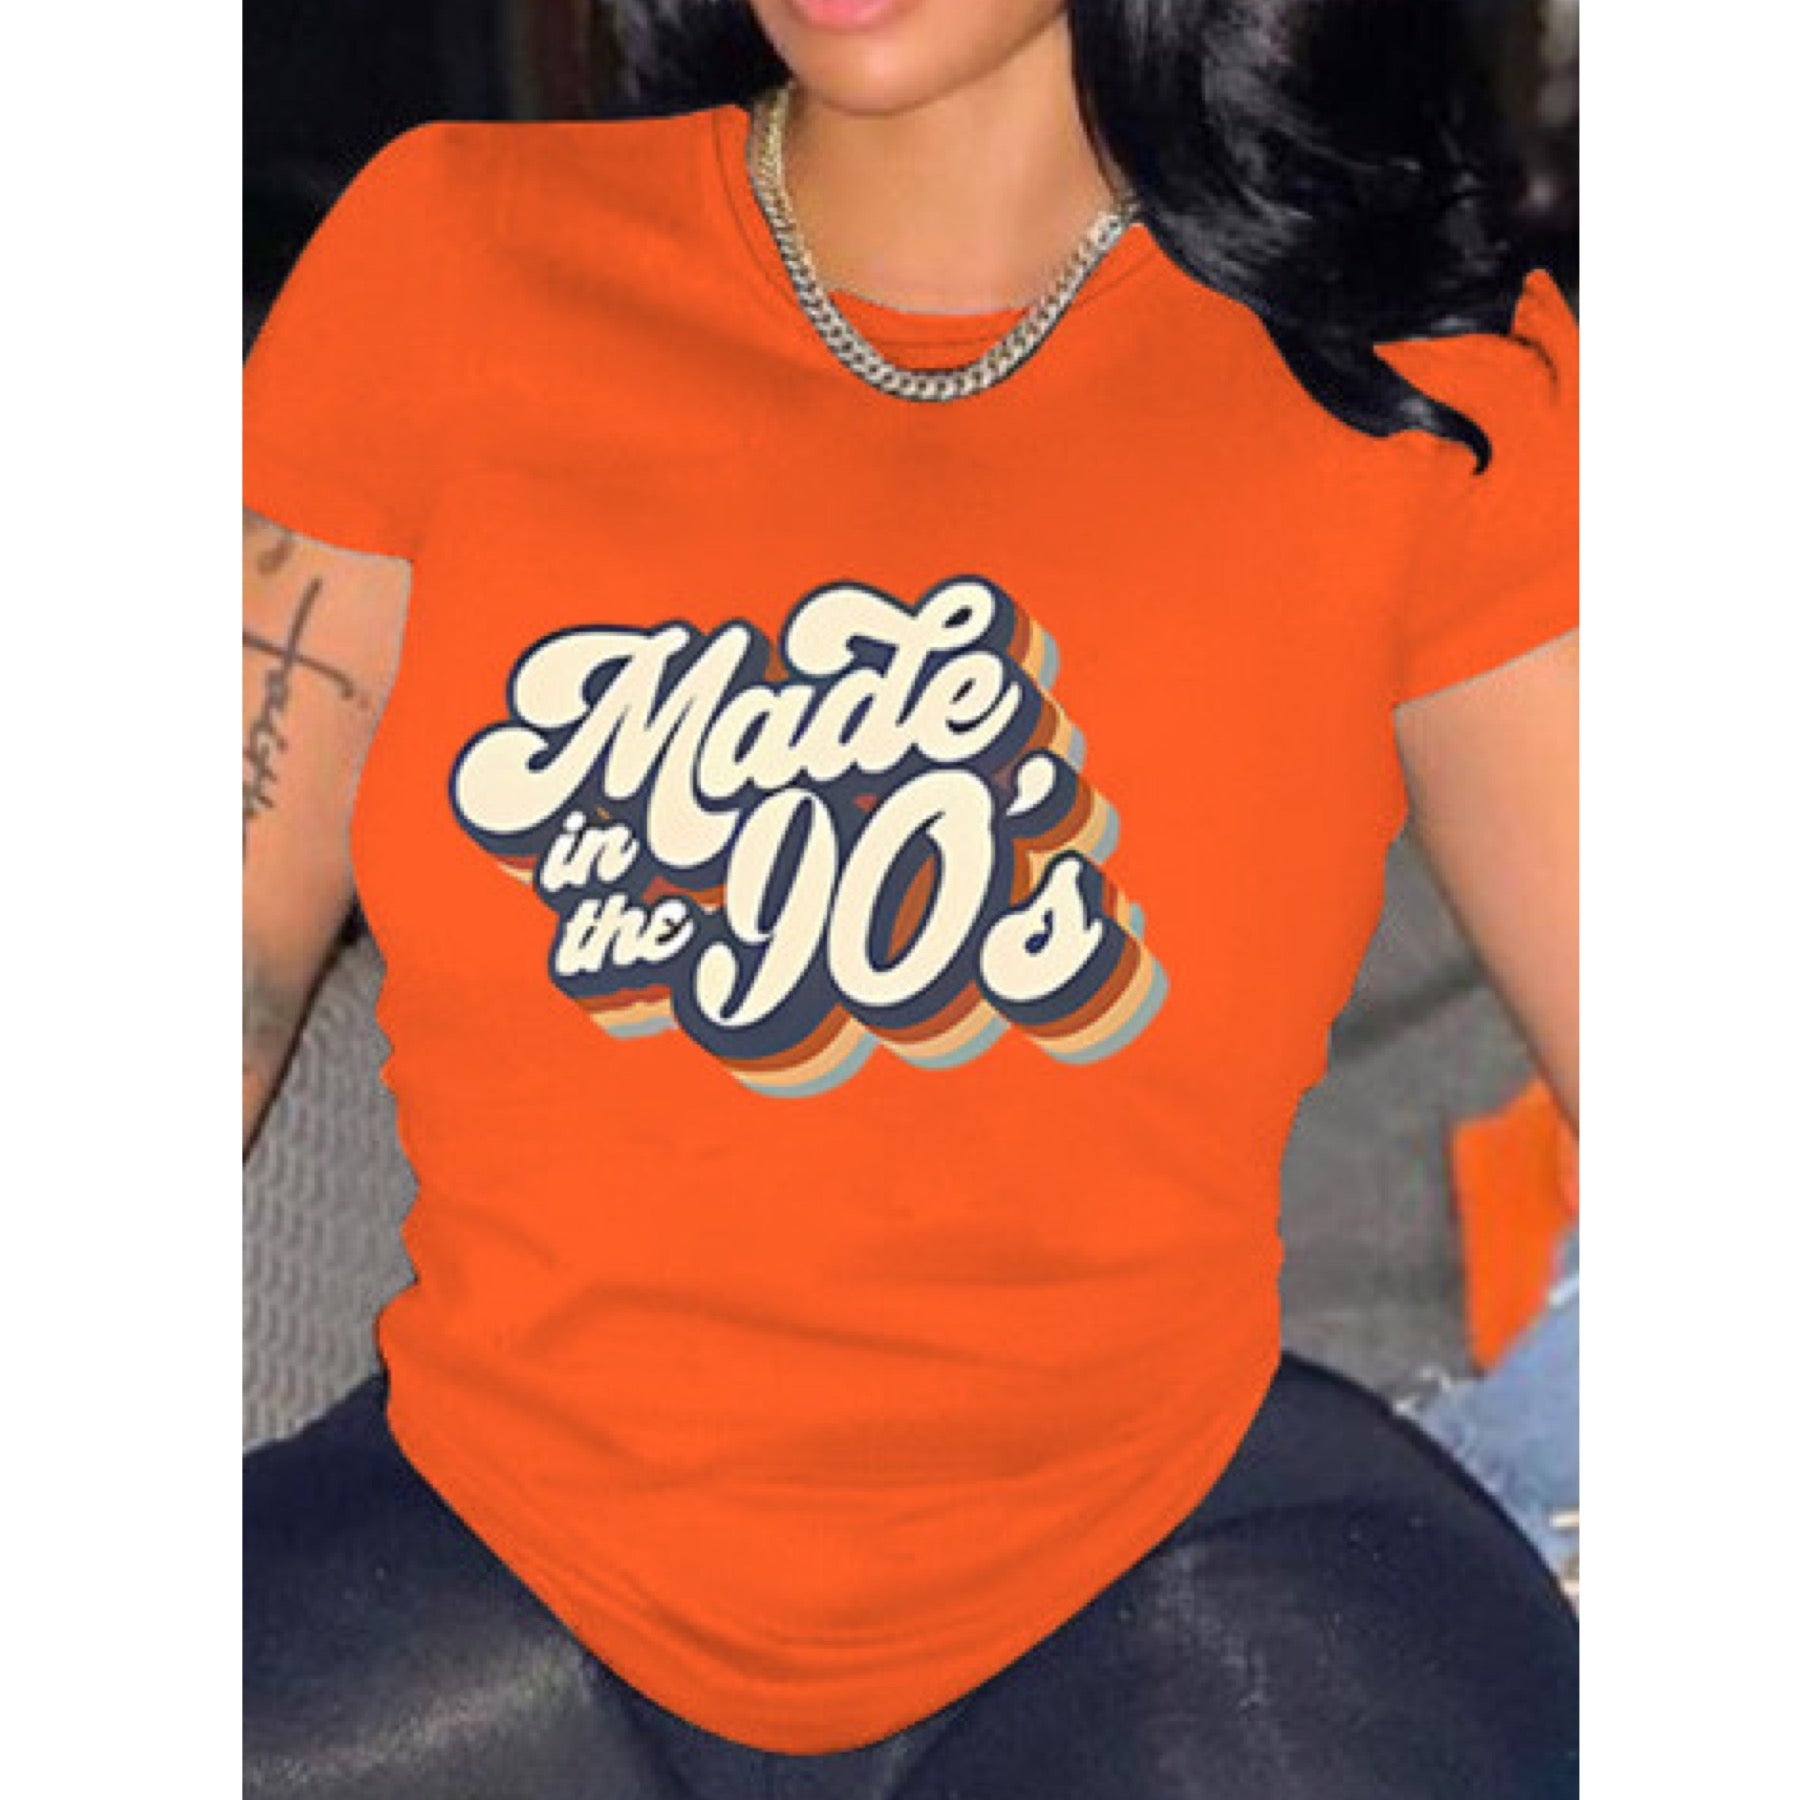 Made in the 90’s Print Graphic Tee Shirt